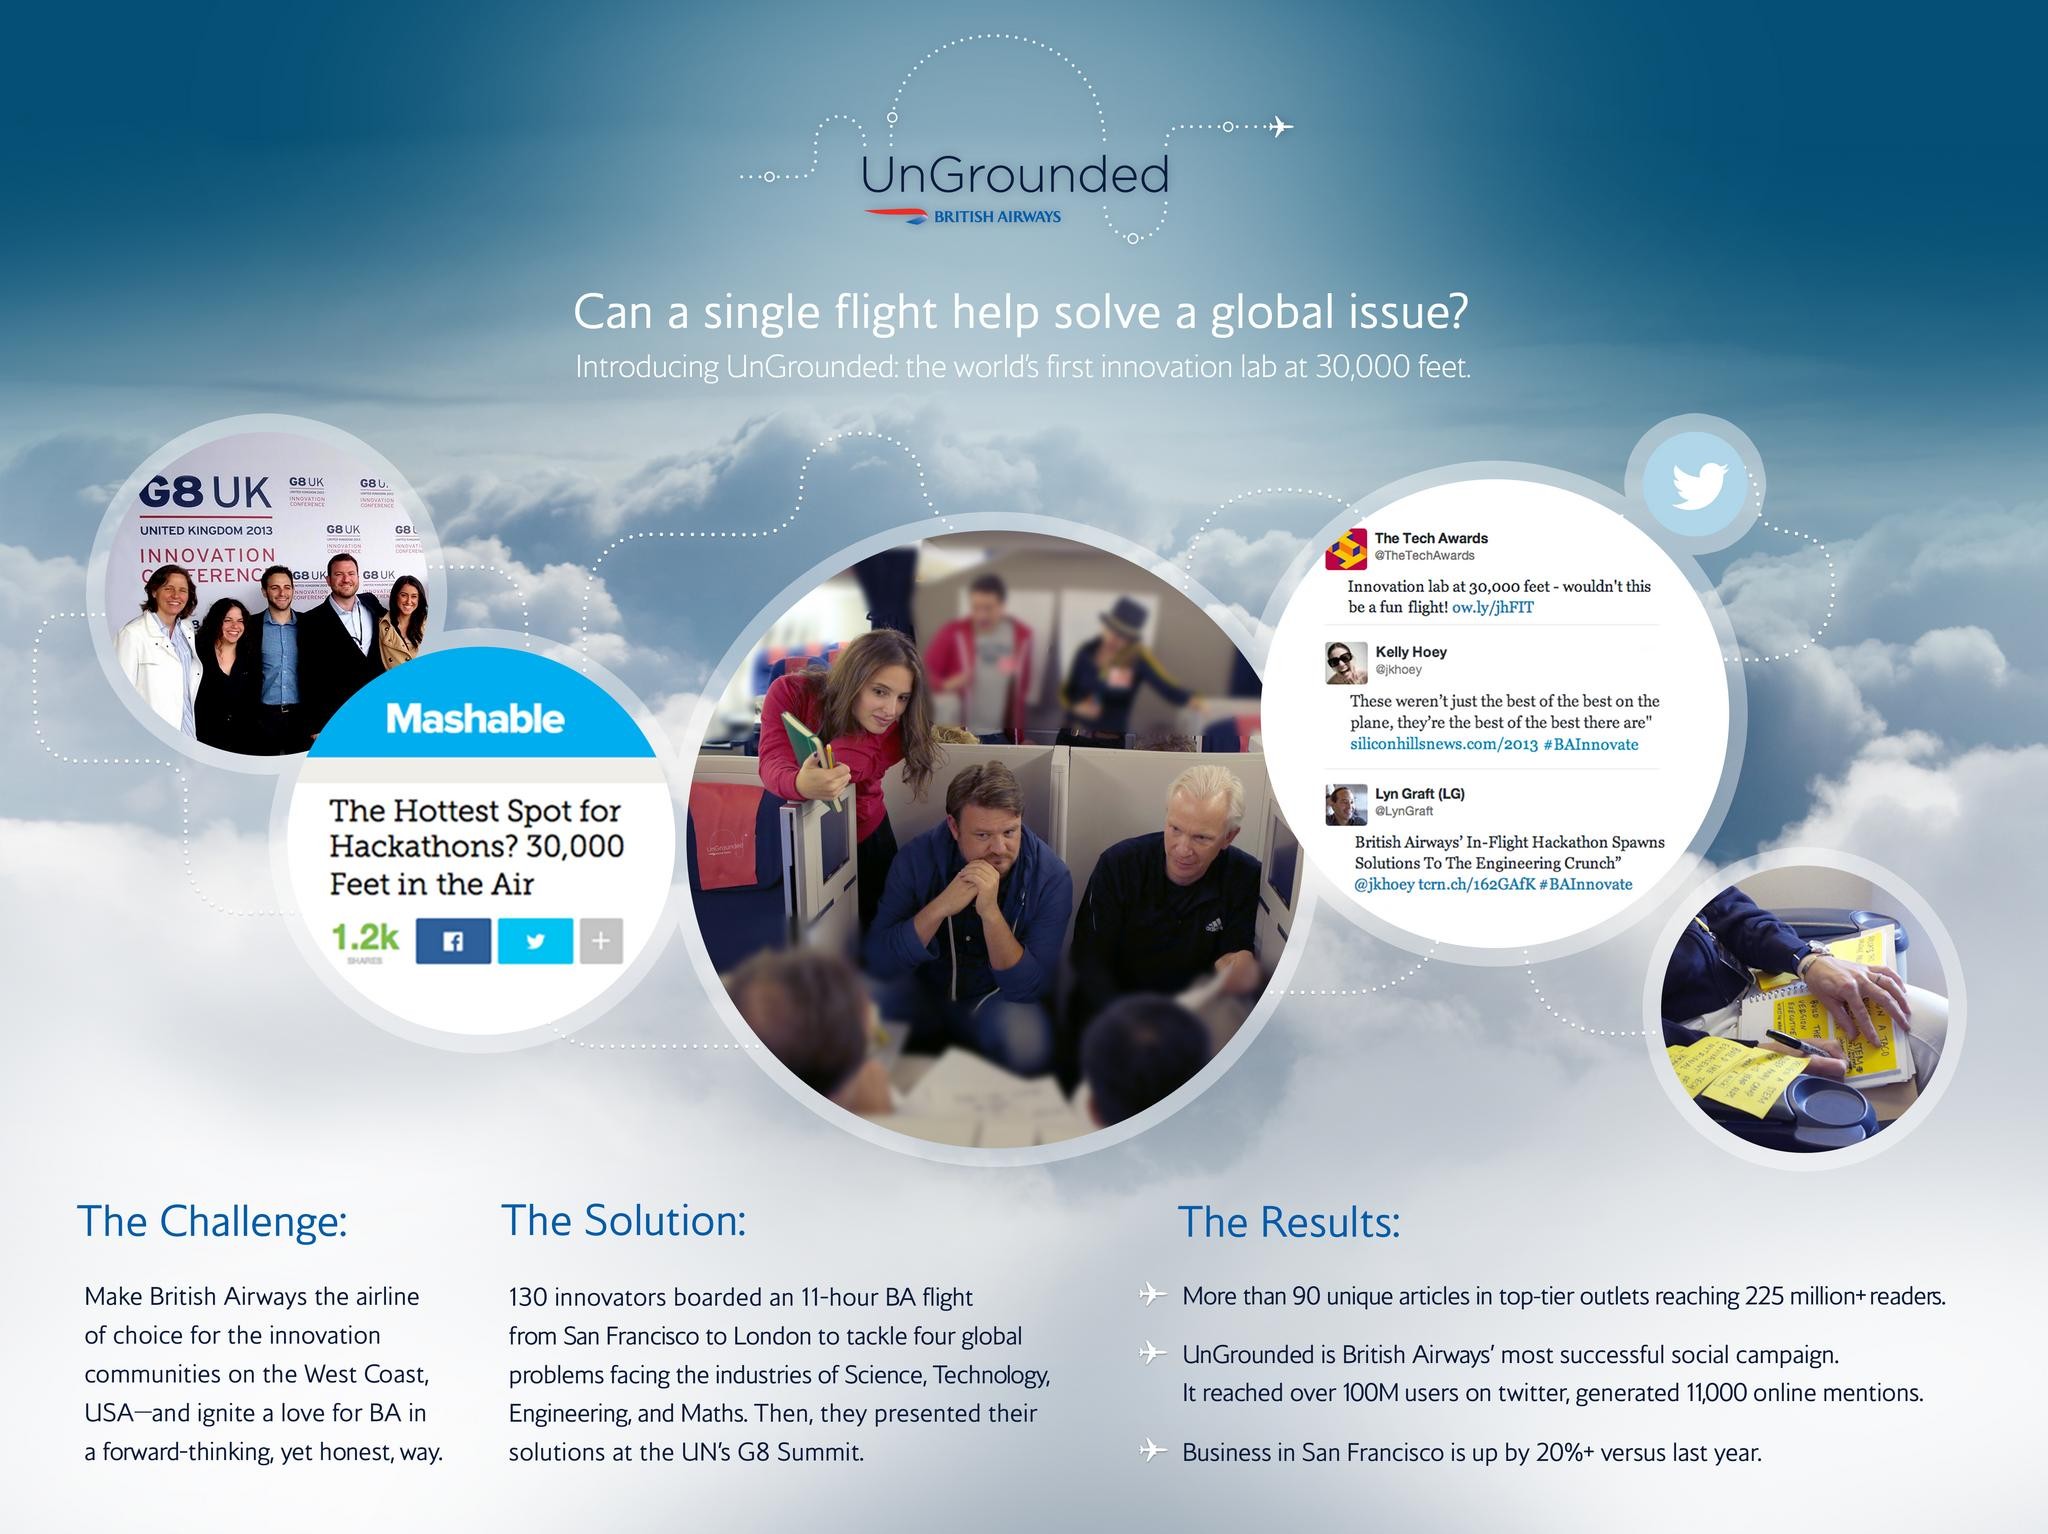 UNGROUNDED: AN INNOVATION LAB IN THE SKY